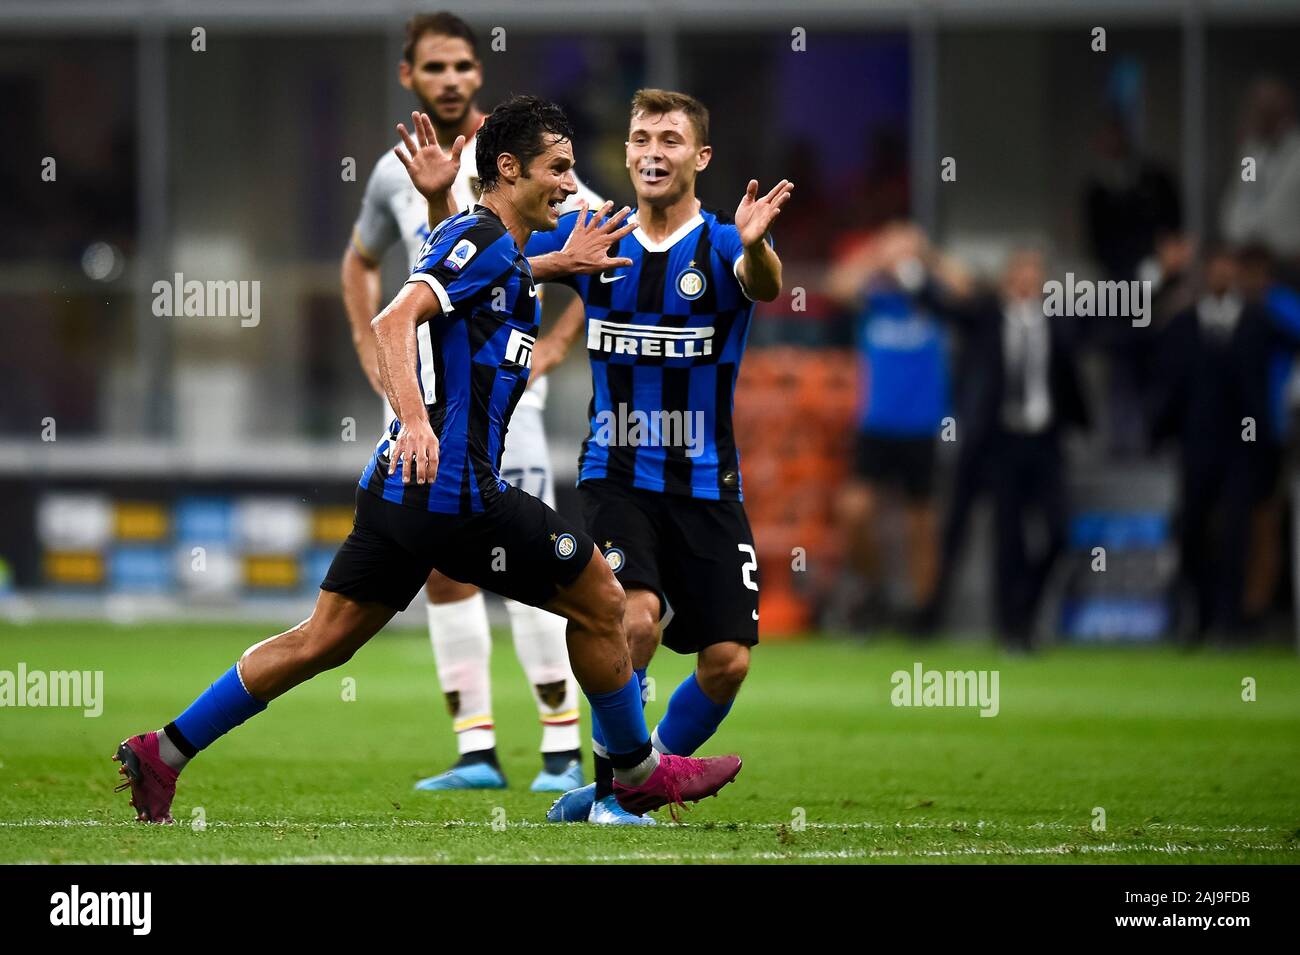 Milan, Italy. 26 August, 2019: Marcelo Brozovic of FC Internazionale celebrates with Nicolo Barella of FC Internazionale after scoring a goal during the Serie A football match between FC Internazionale and US Lecce. FC Internazionale won 4-0 over US Lecce. Credit: Nicolò Campo/Alamy Live News Stock Photo